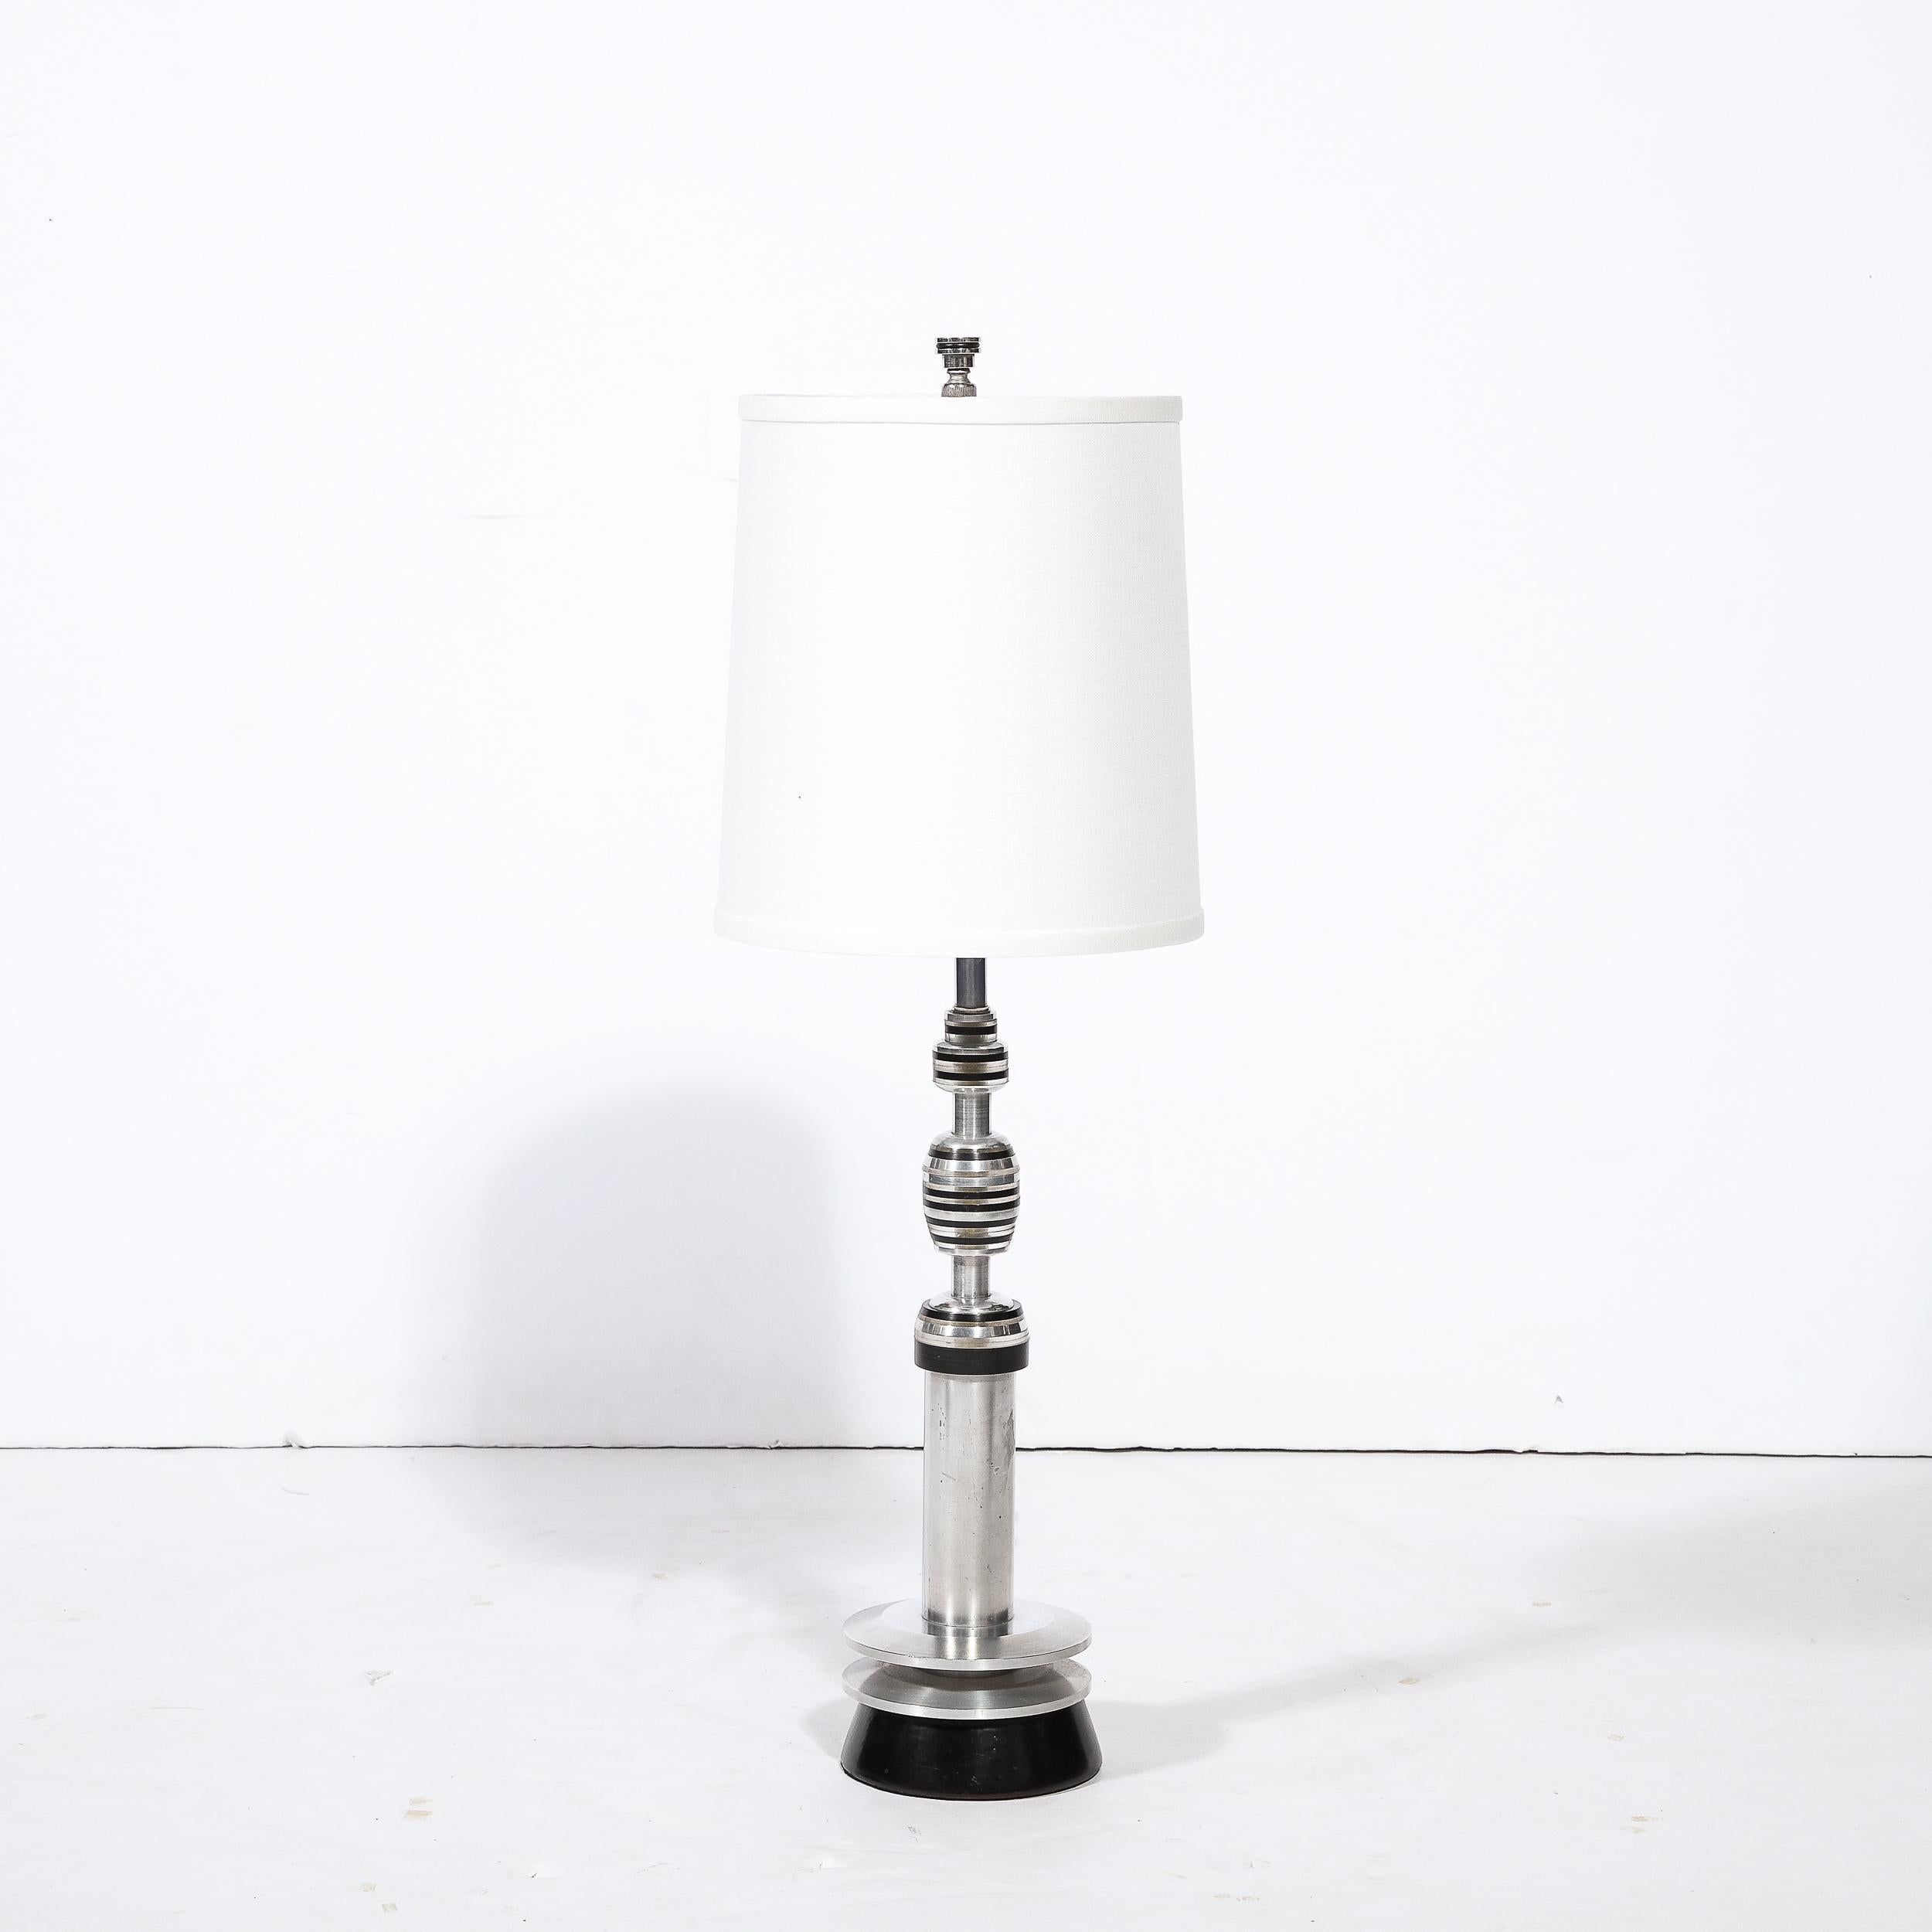 This refined Art Deco Machine Age table lamp was realized in the United States circa 1935. It features a skyscraper style conical black bakelite base with two ringed embellishments floating above that are pierced through by the cylindrical aluminum